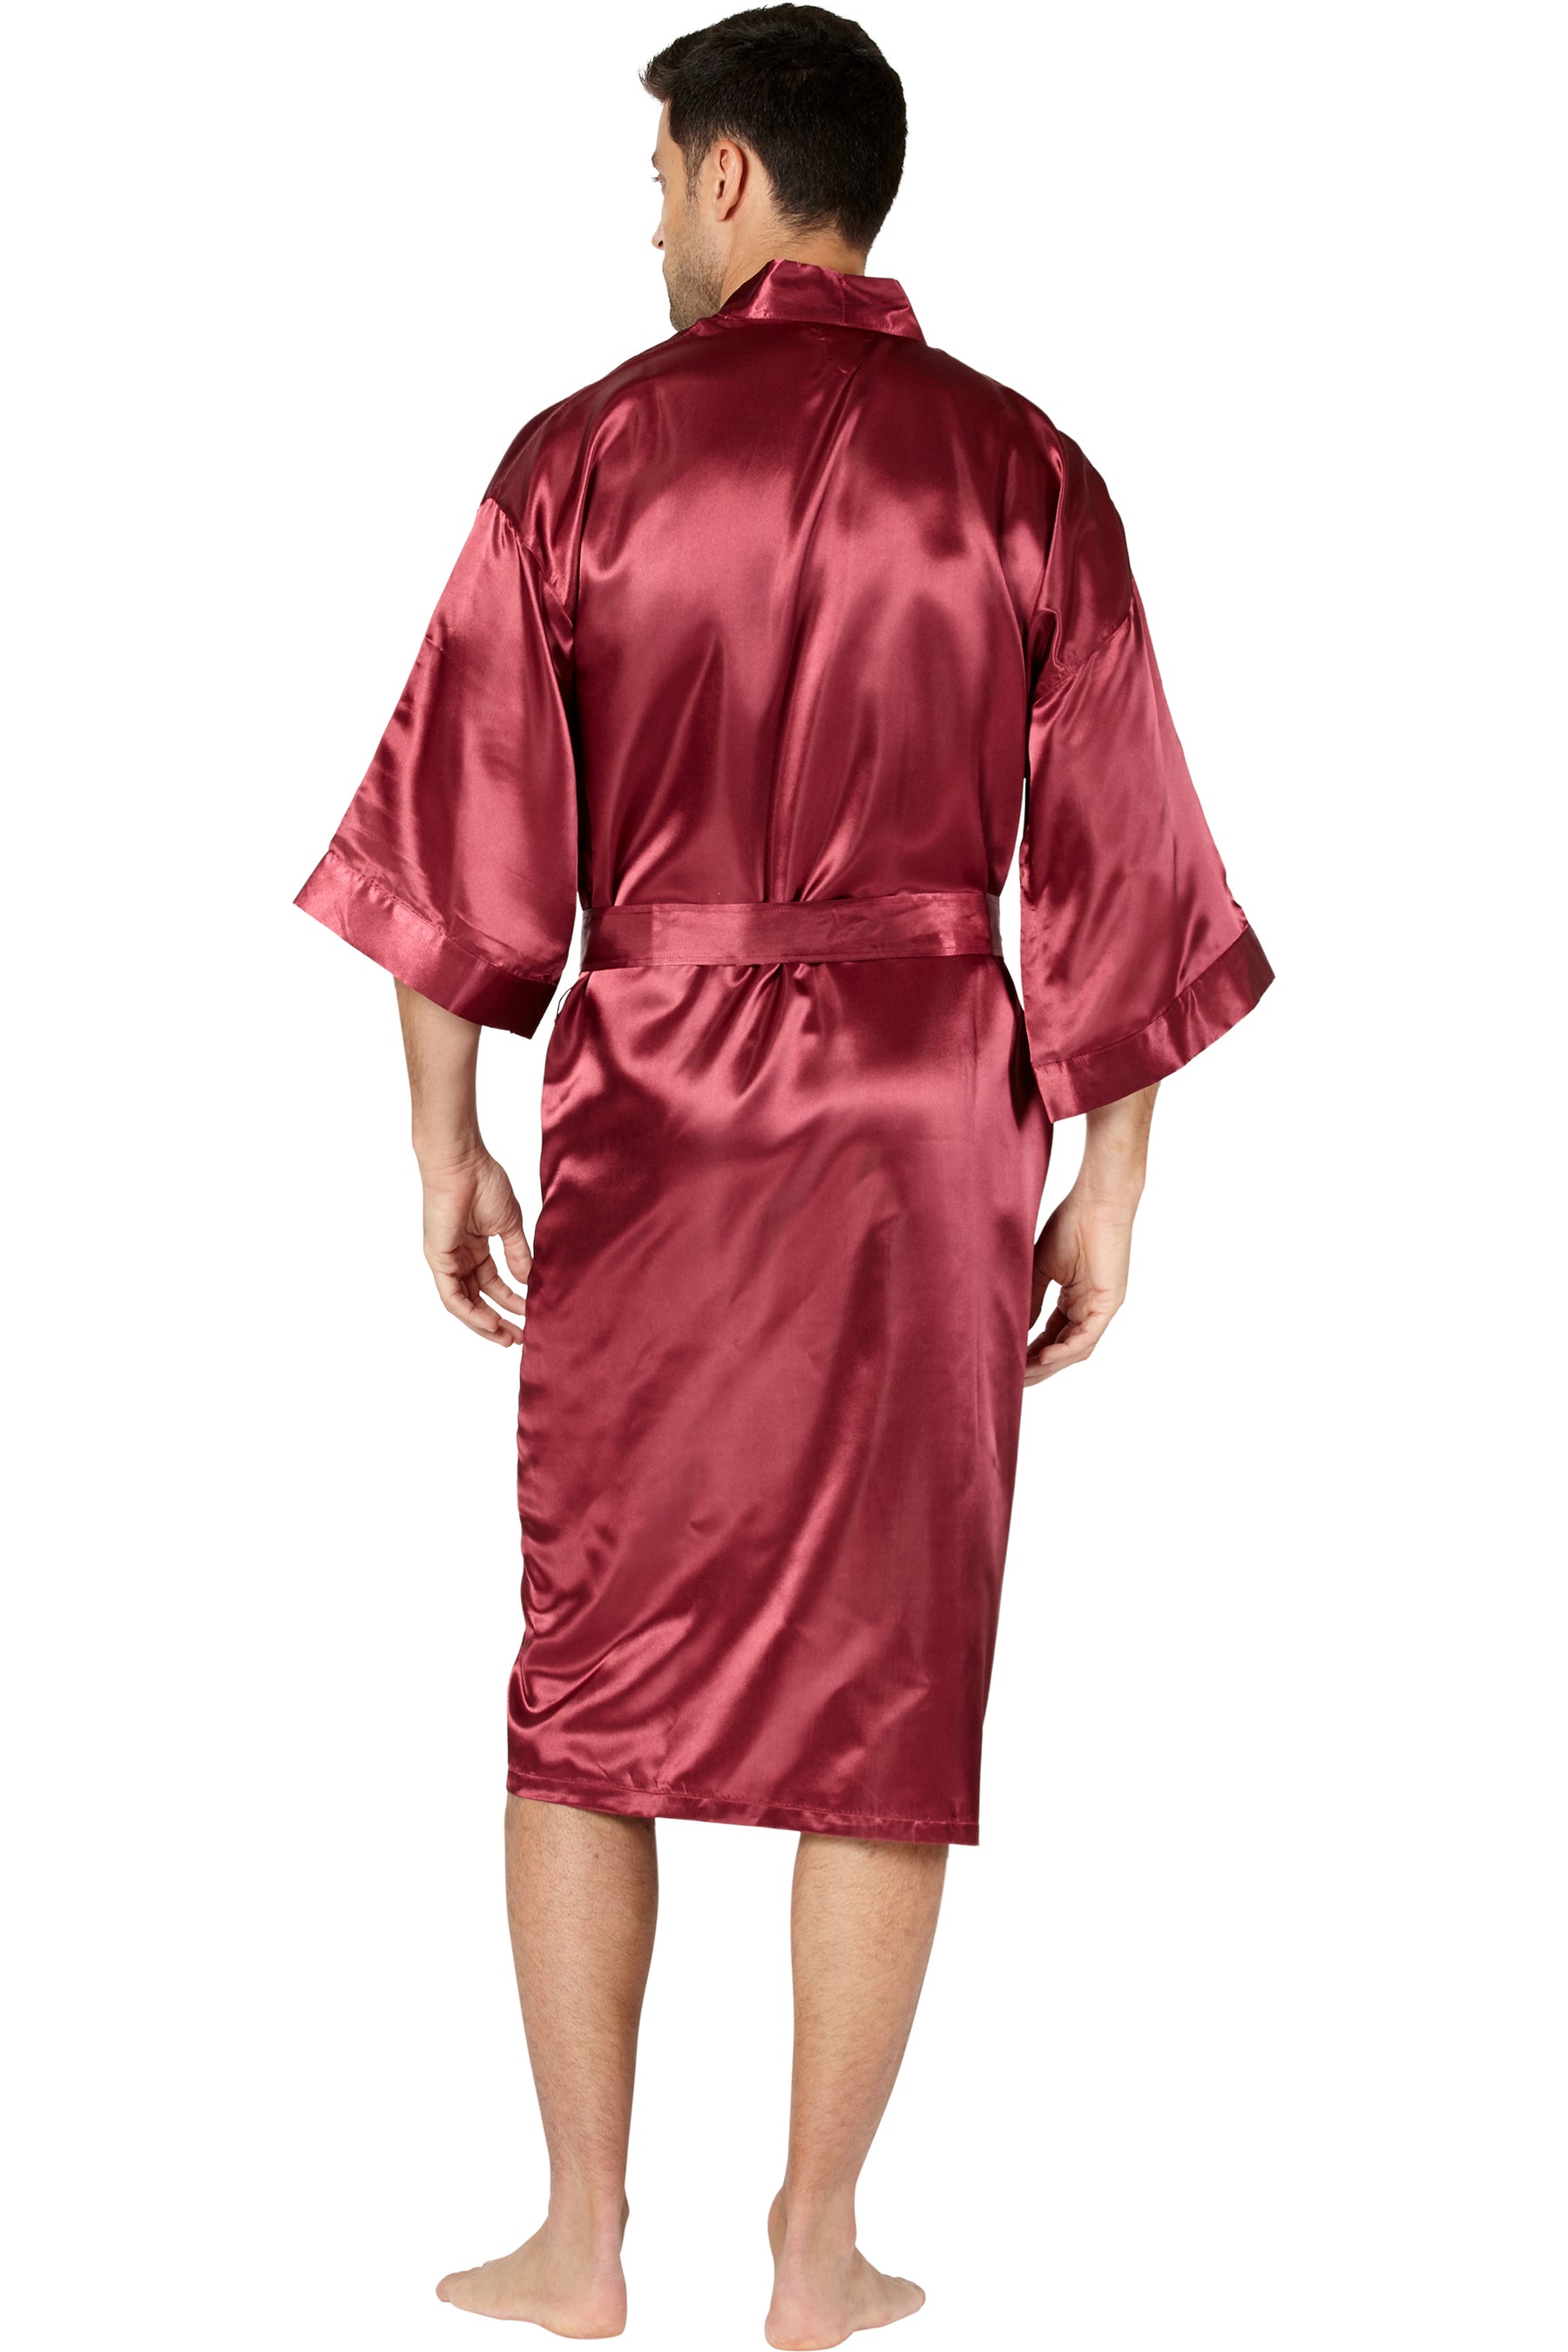 Men's Red Dressing Gown | Renfield Smoking Jacket Robe | Gowns dresses, Silk  dressing gown, Satin dressing gown